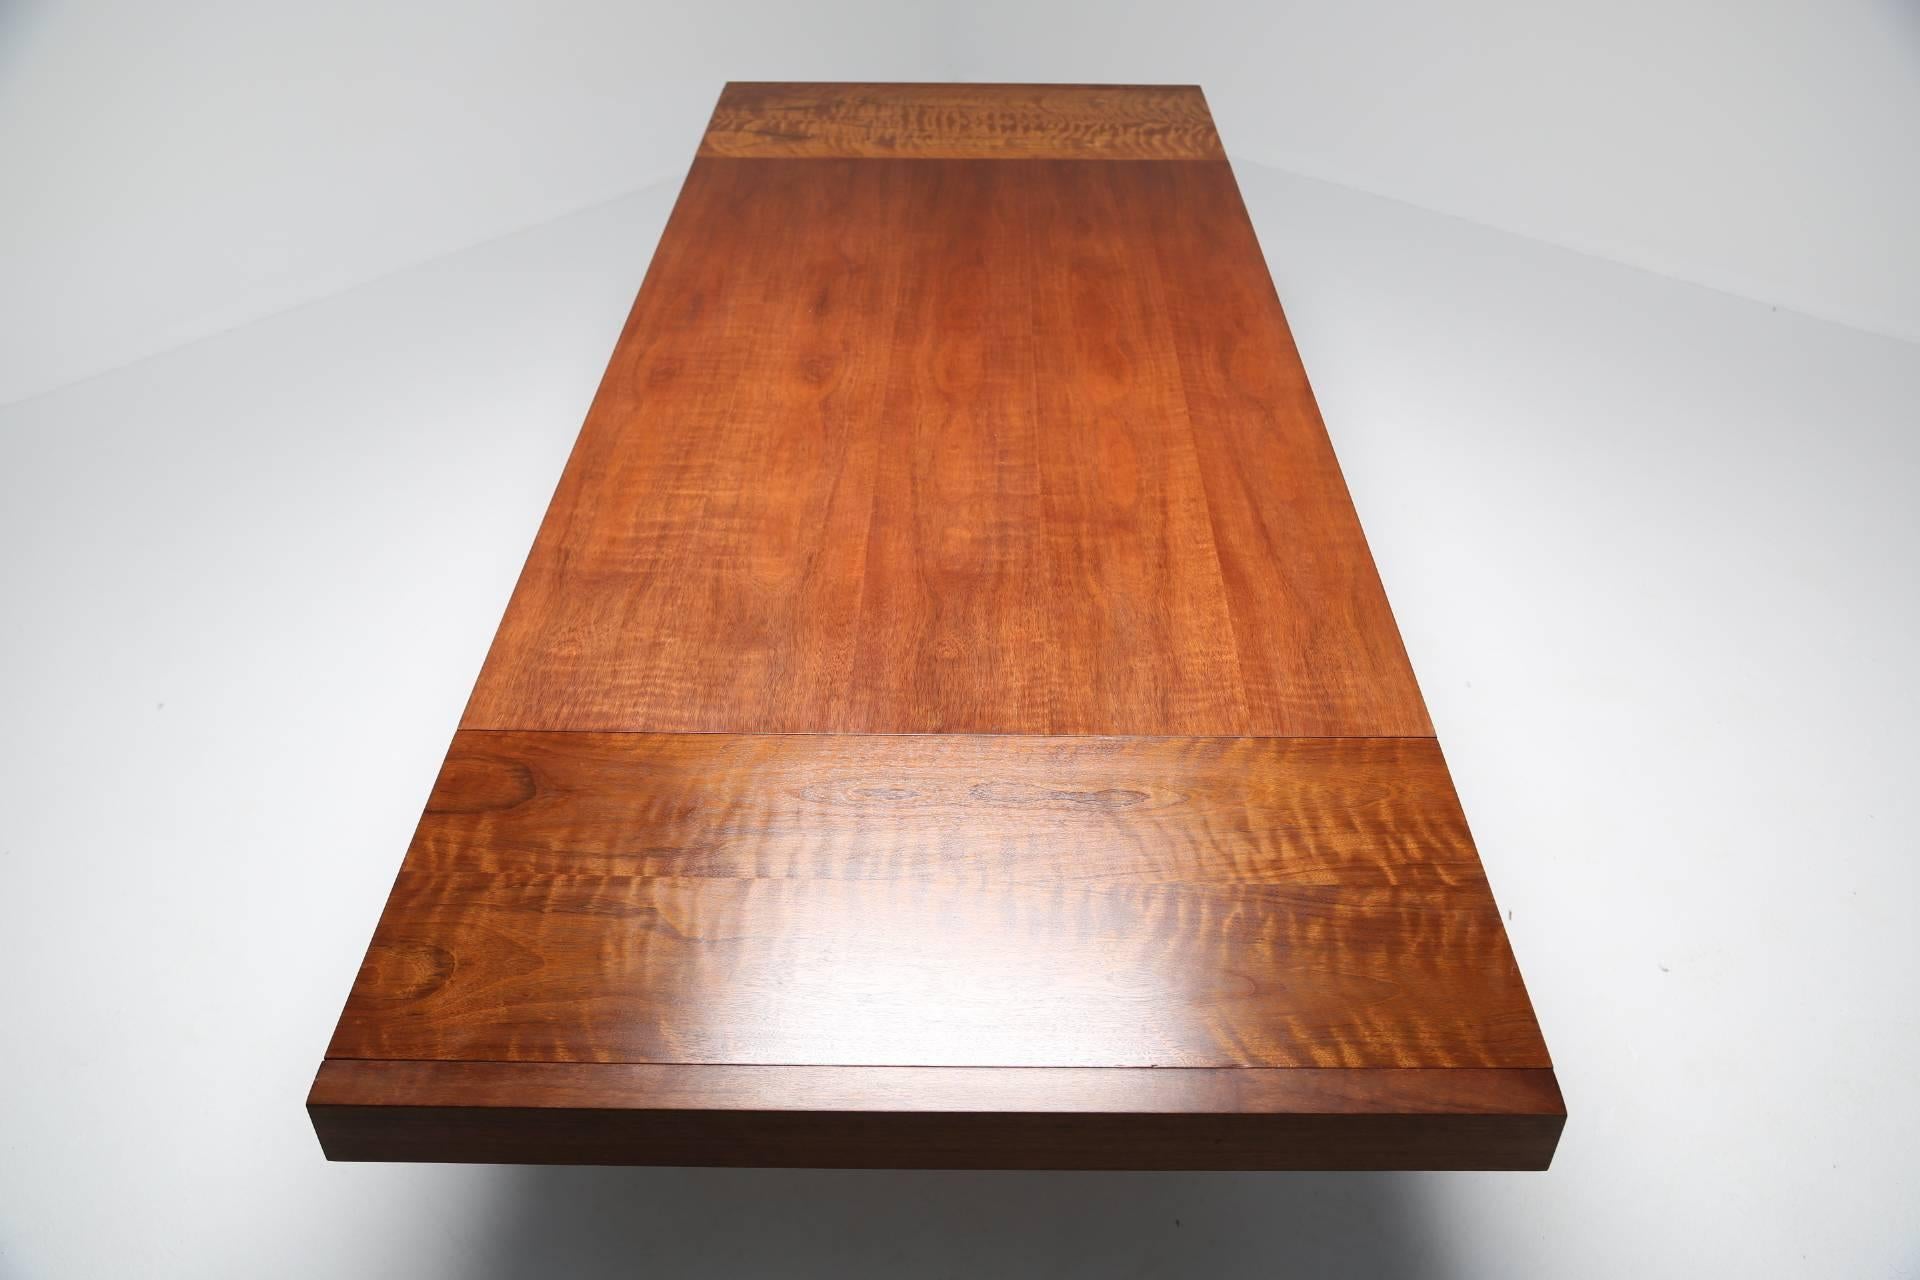 A walnut dining table designed and made by Founders furniture company circa 1975. The table top floats above the base and creates one of the best silhouettes of any dining table of this period.  The wood has lovely rich warm tones and good clear